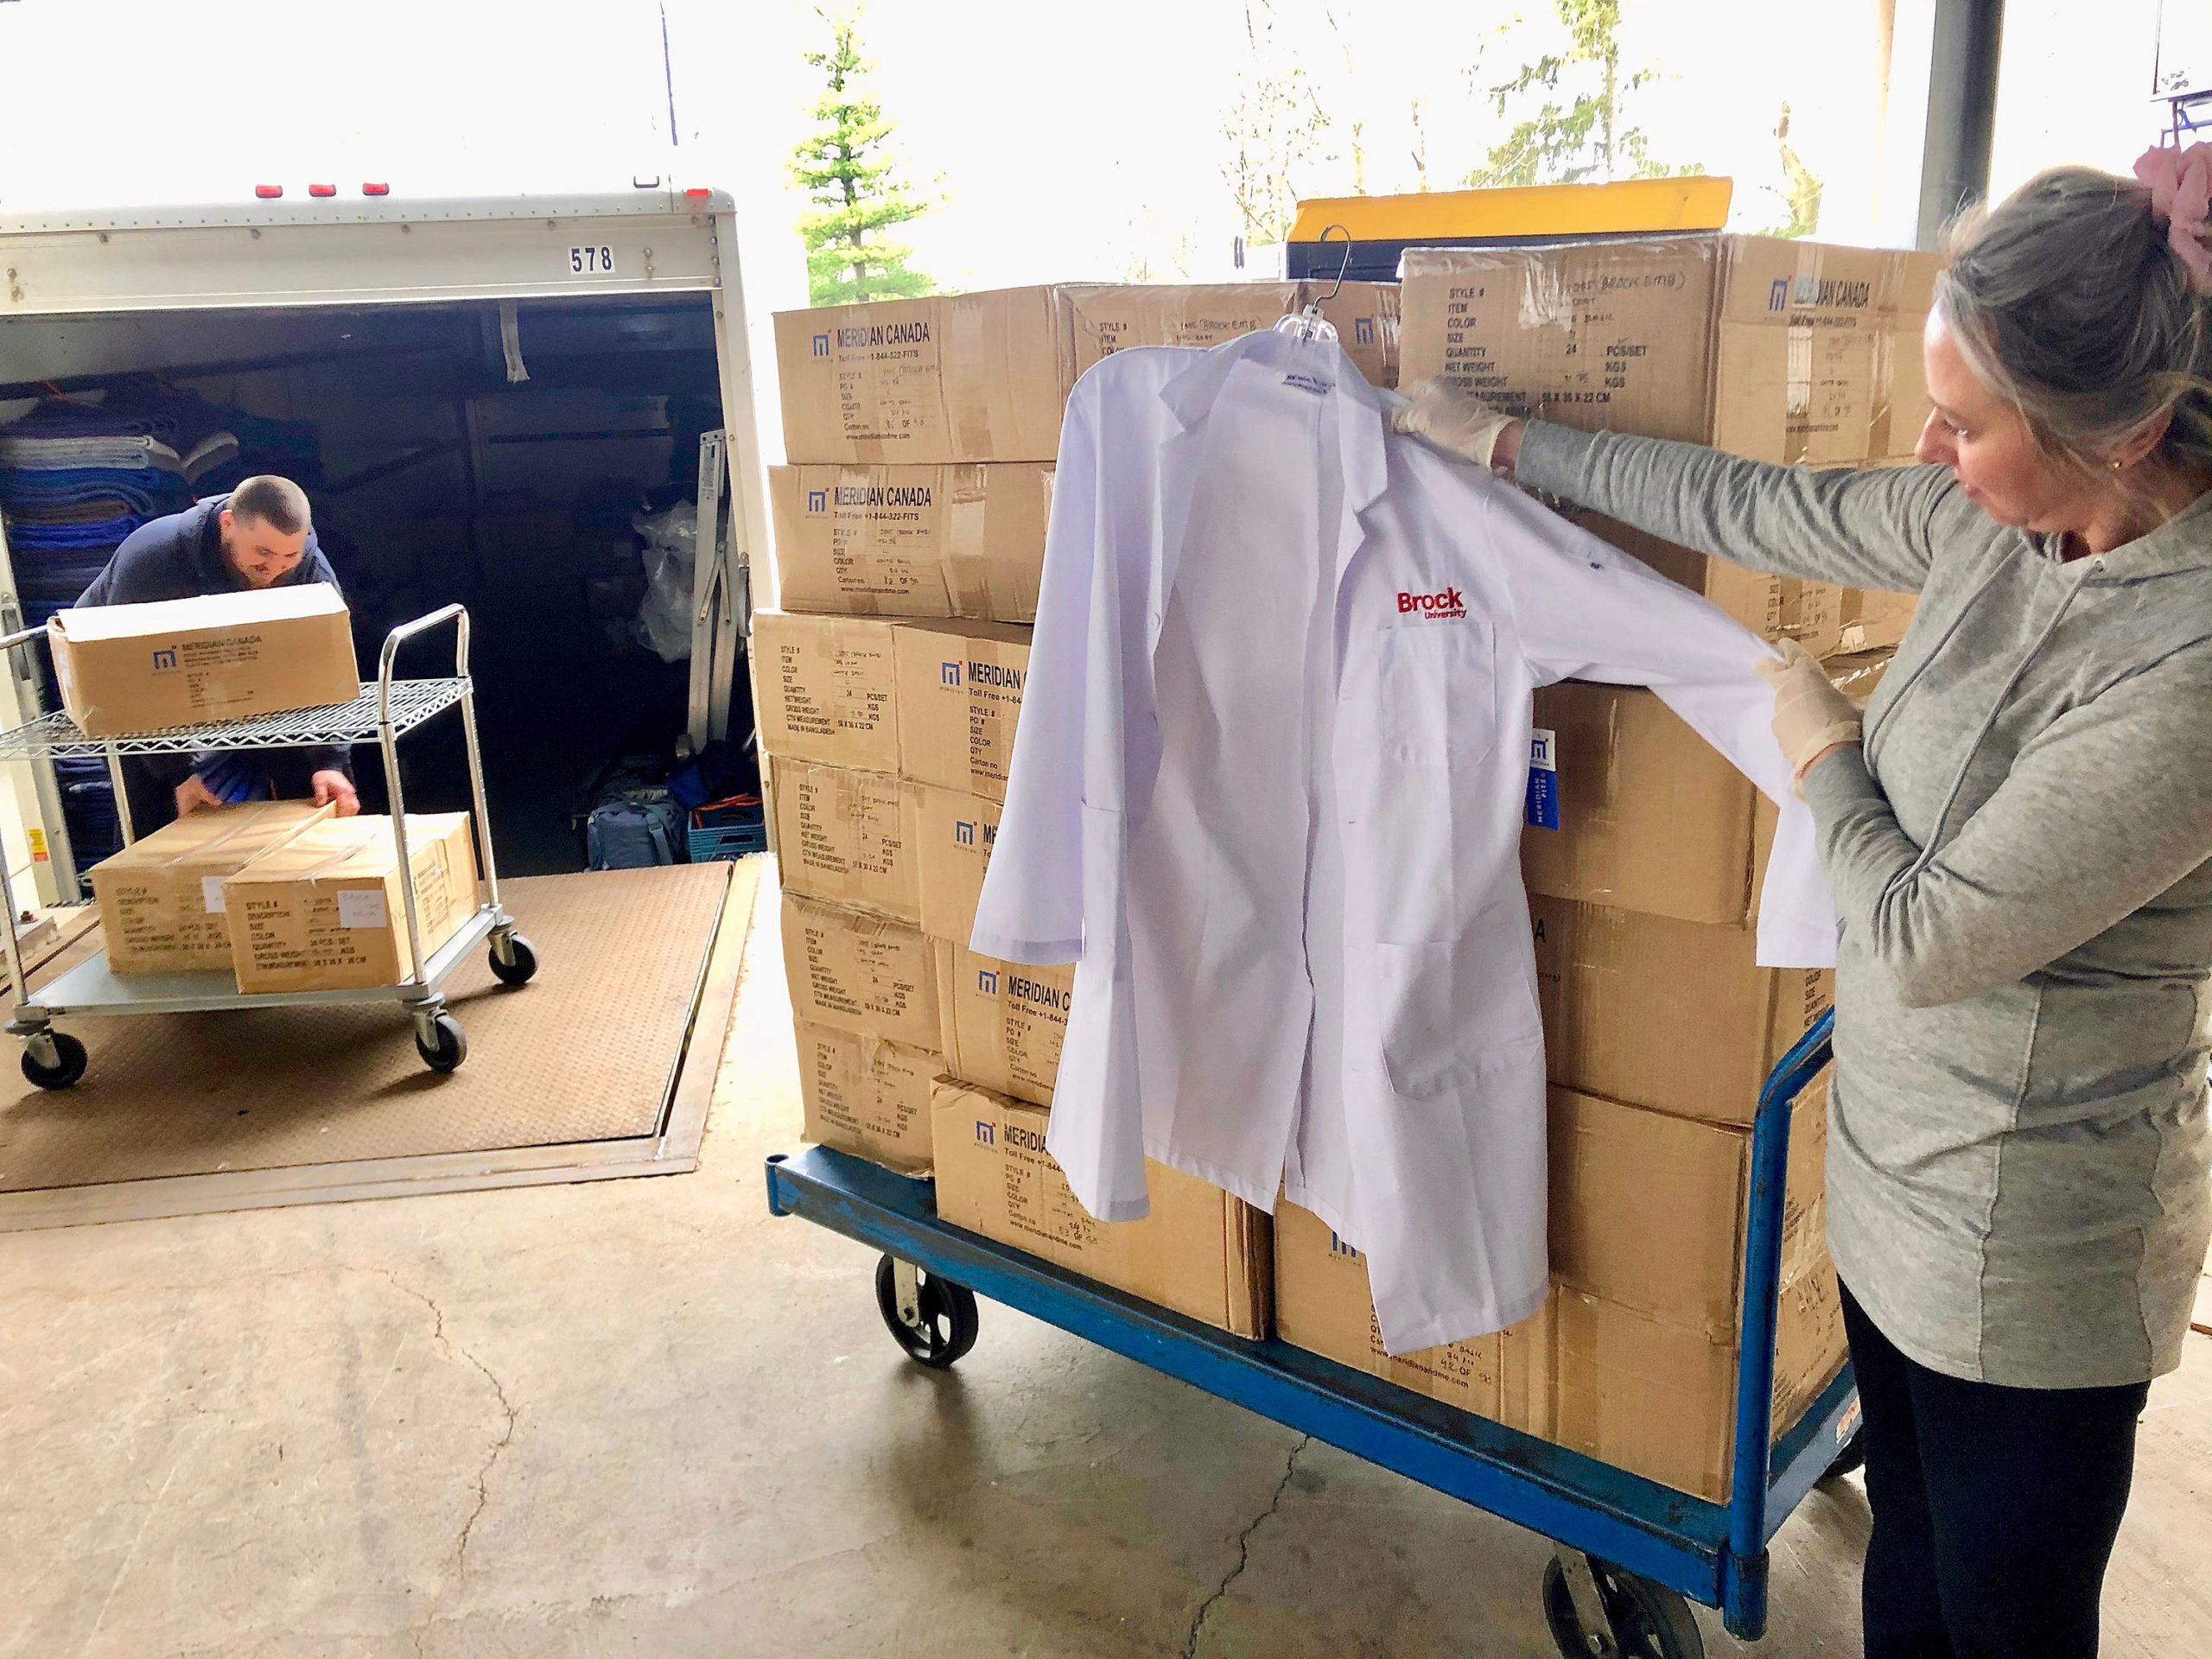 University sends its supplies to Niagara’s front-line workers